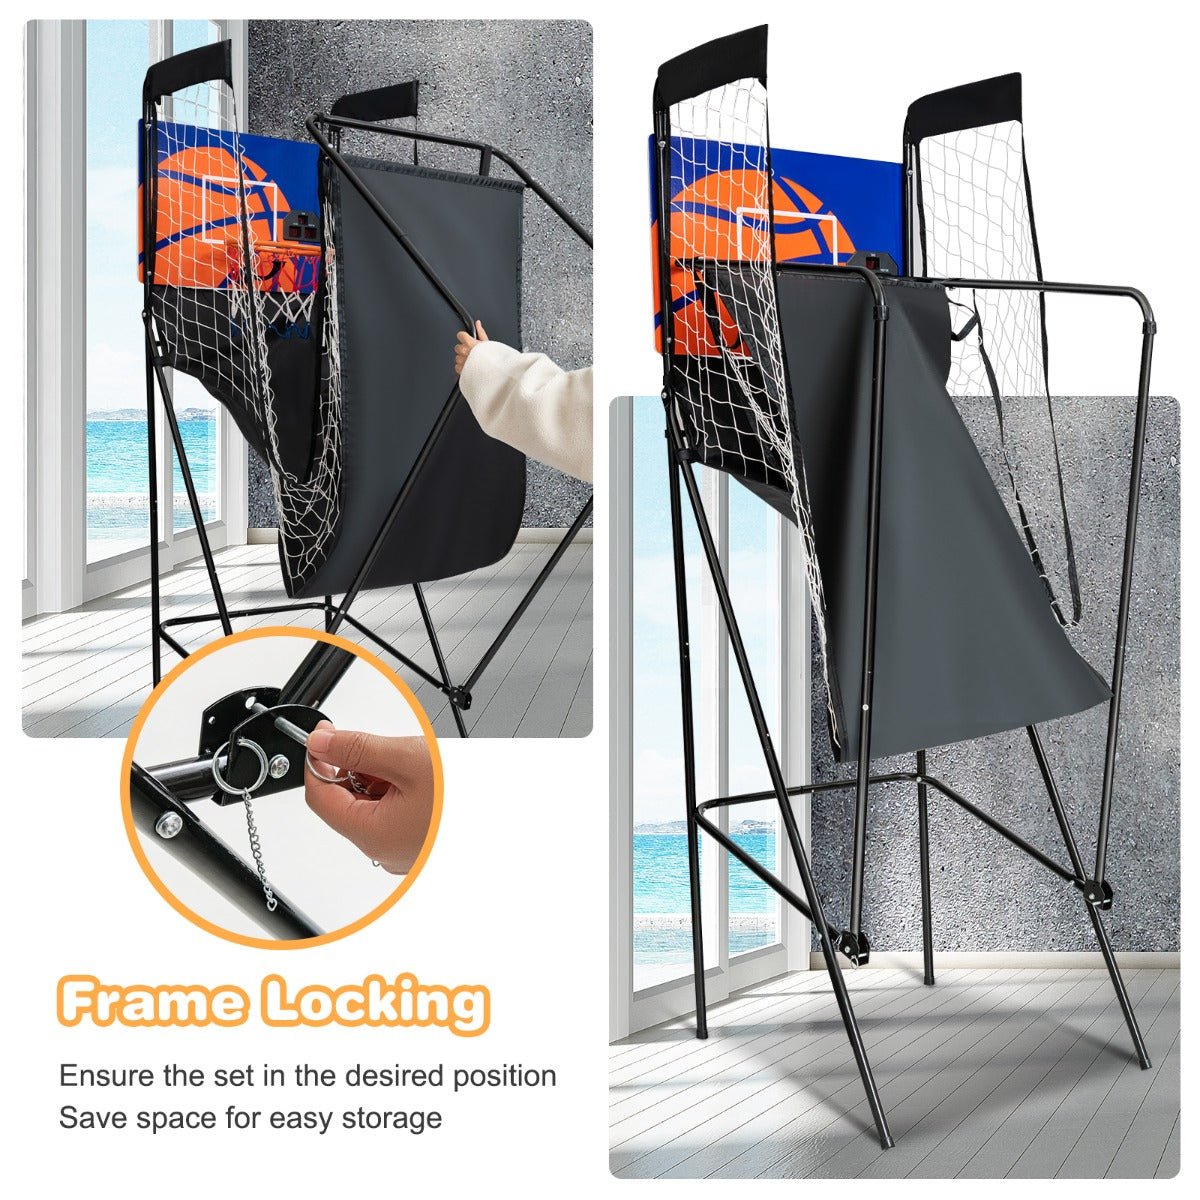 Shoot Hoops at Home: Portable Arcade Basketball Game with Electronic Scorer